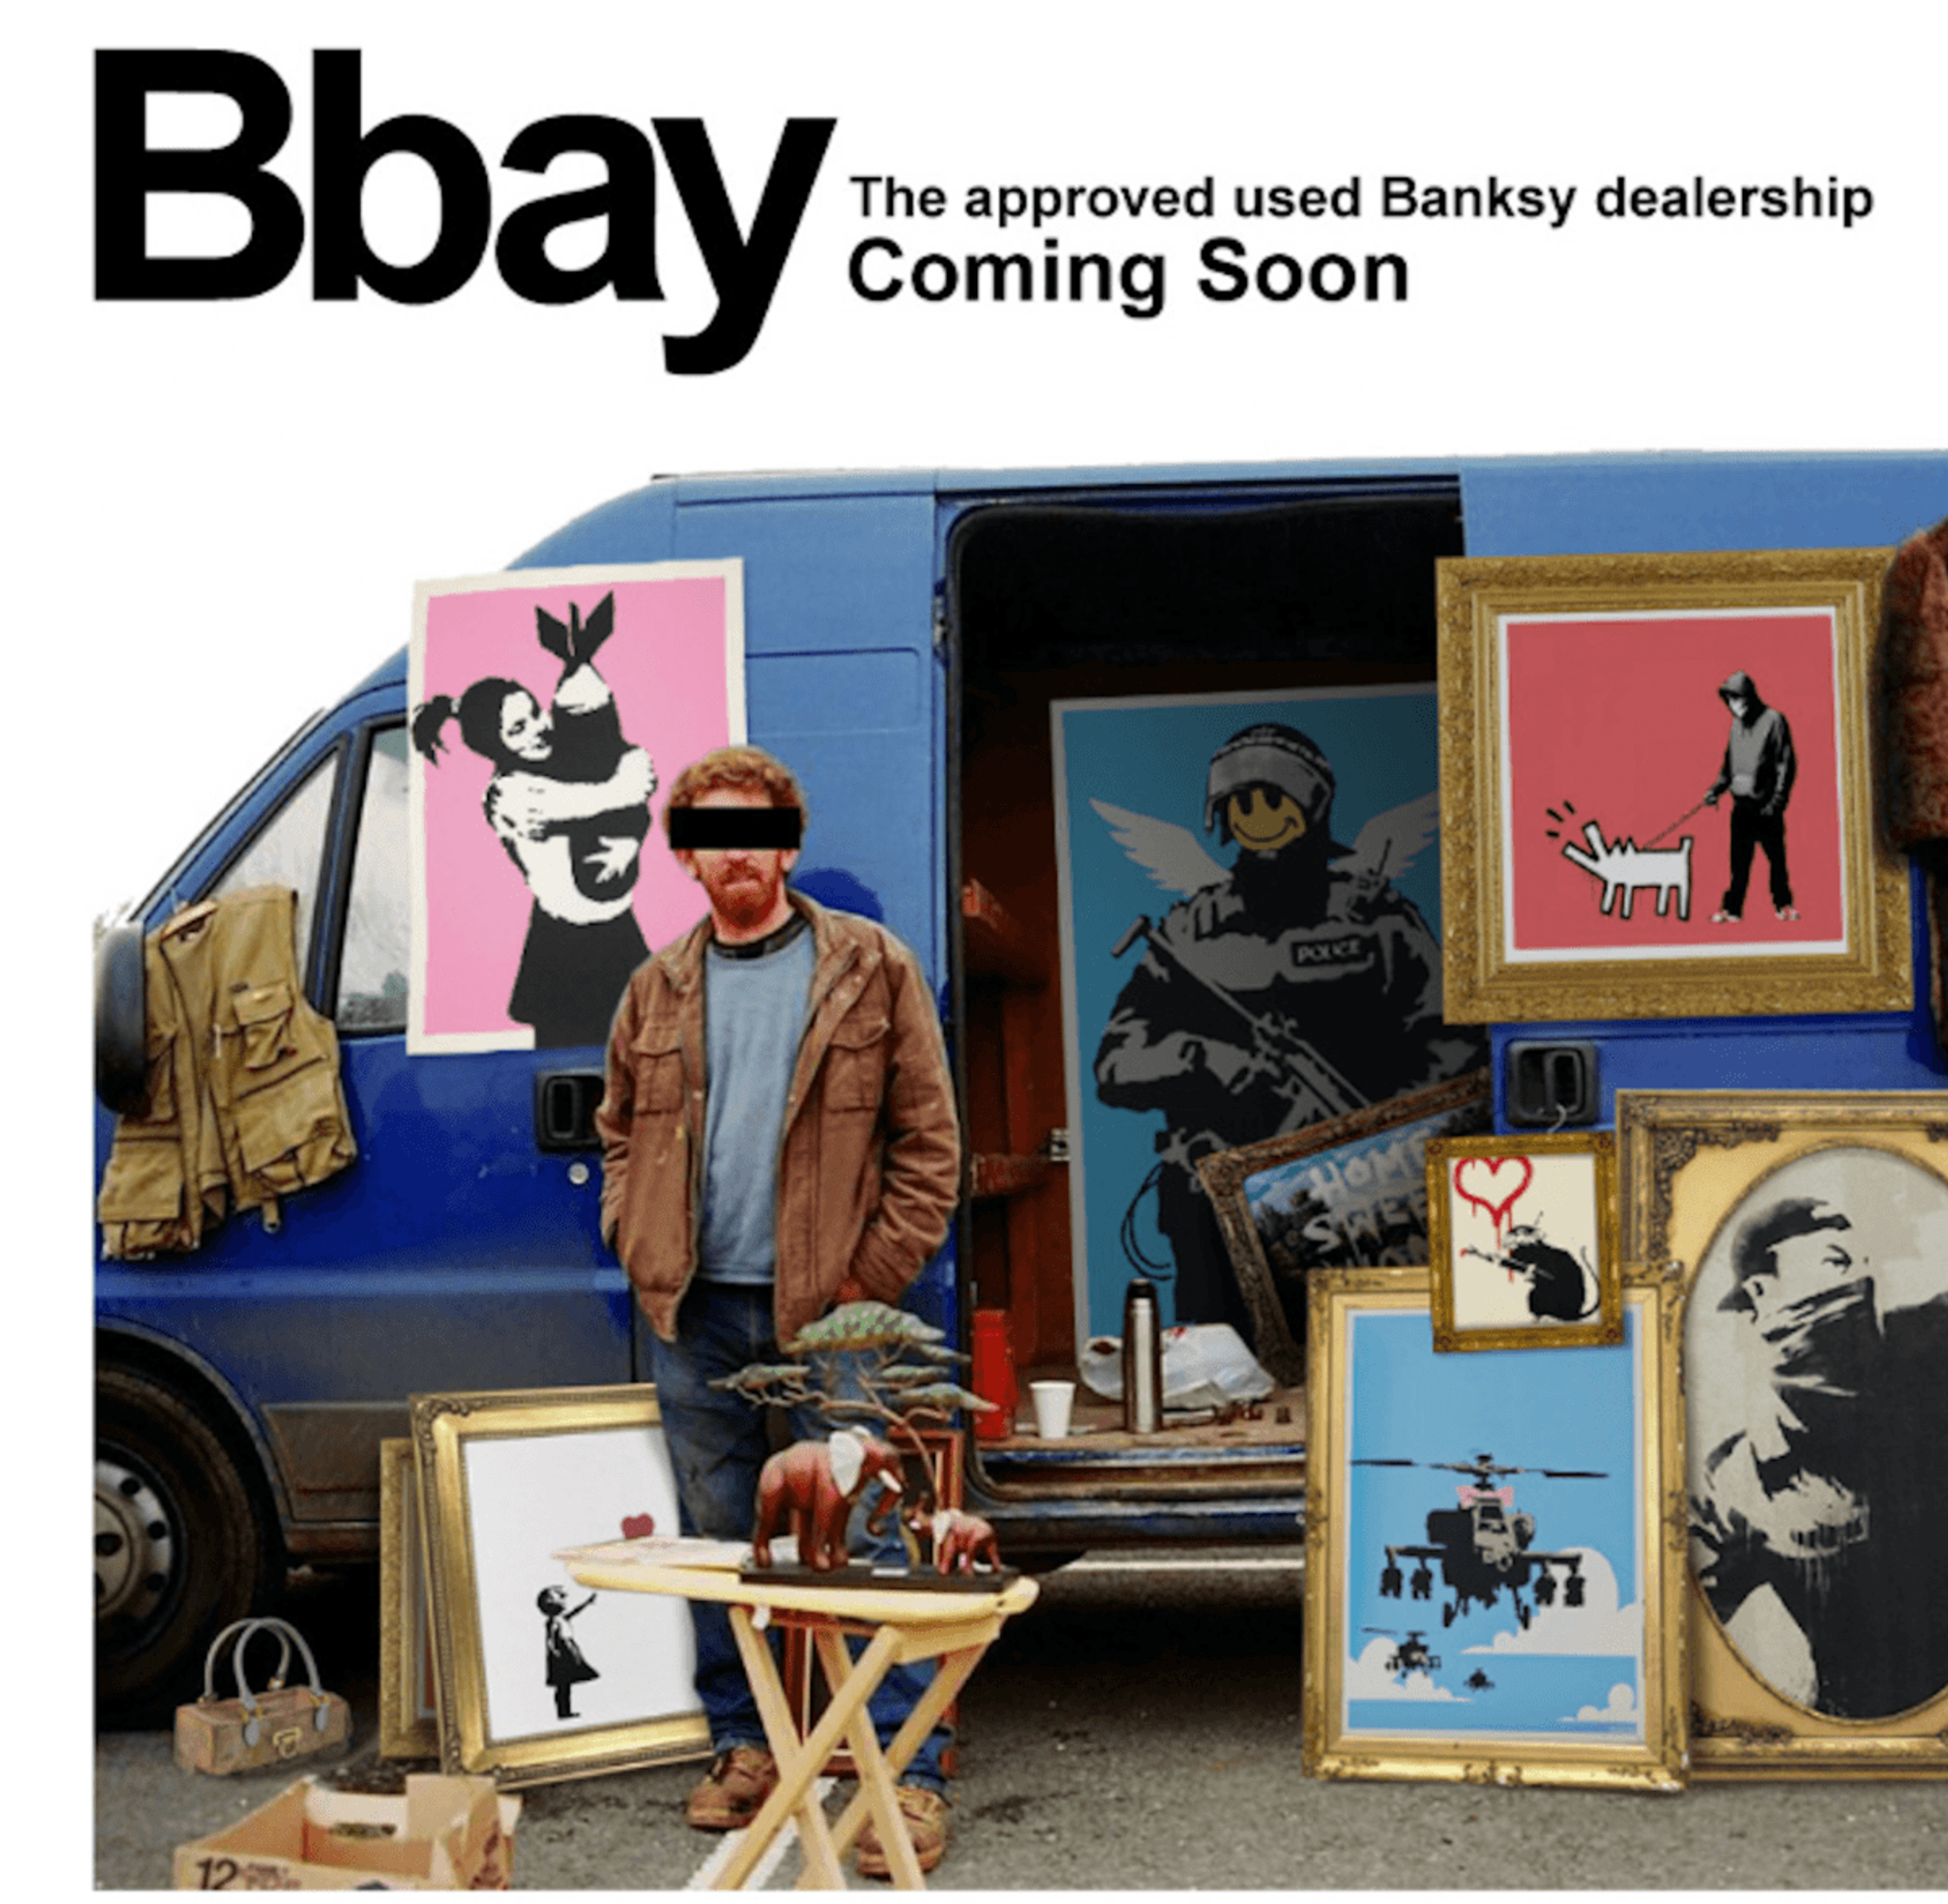 Banksy’s BBay: Everything You Need to Know